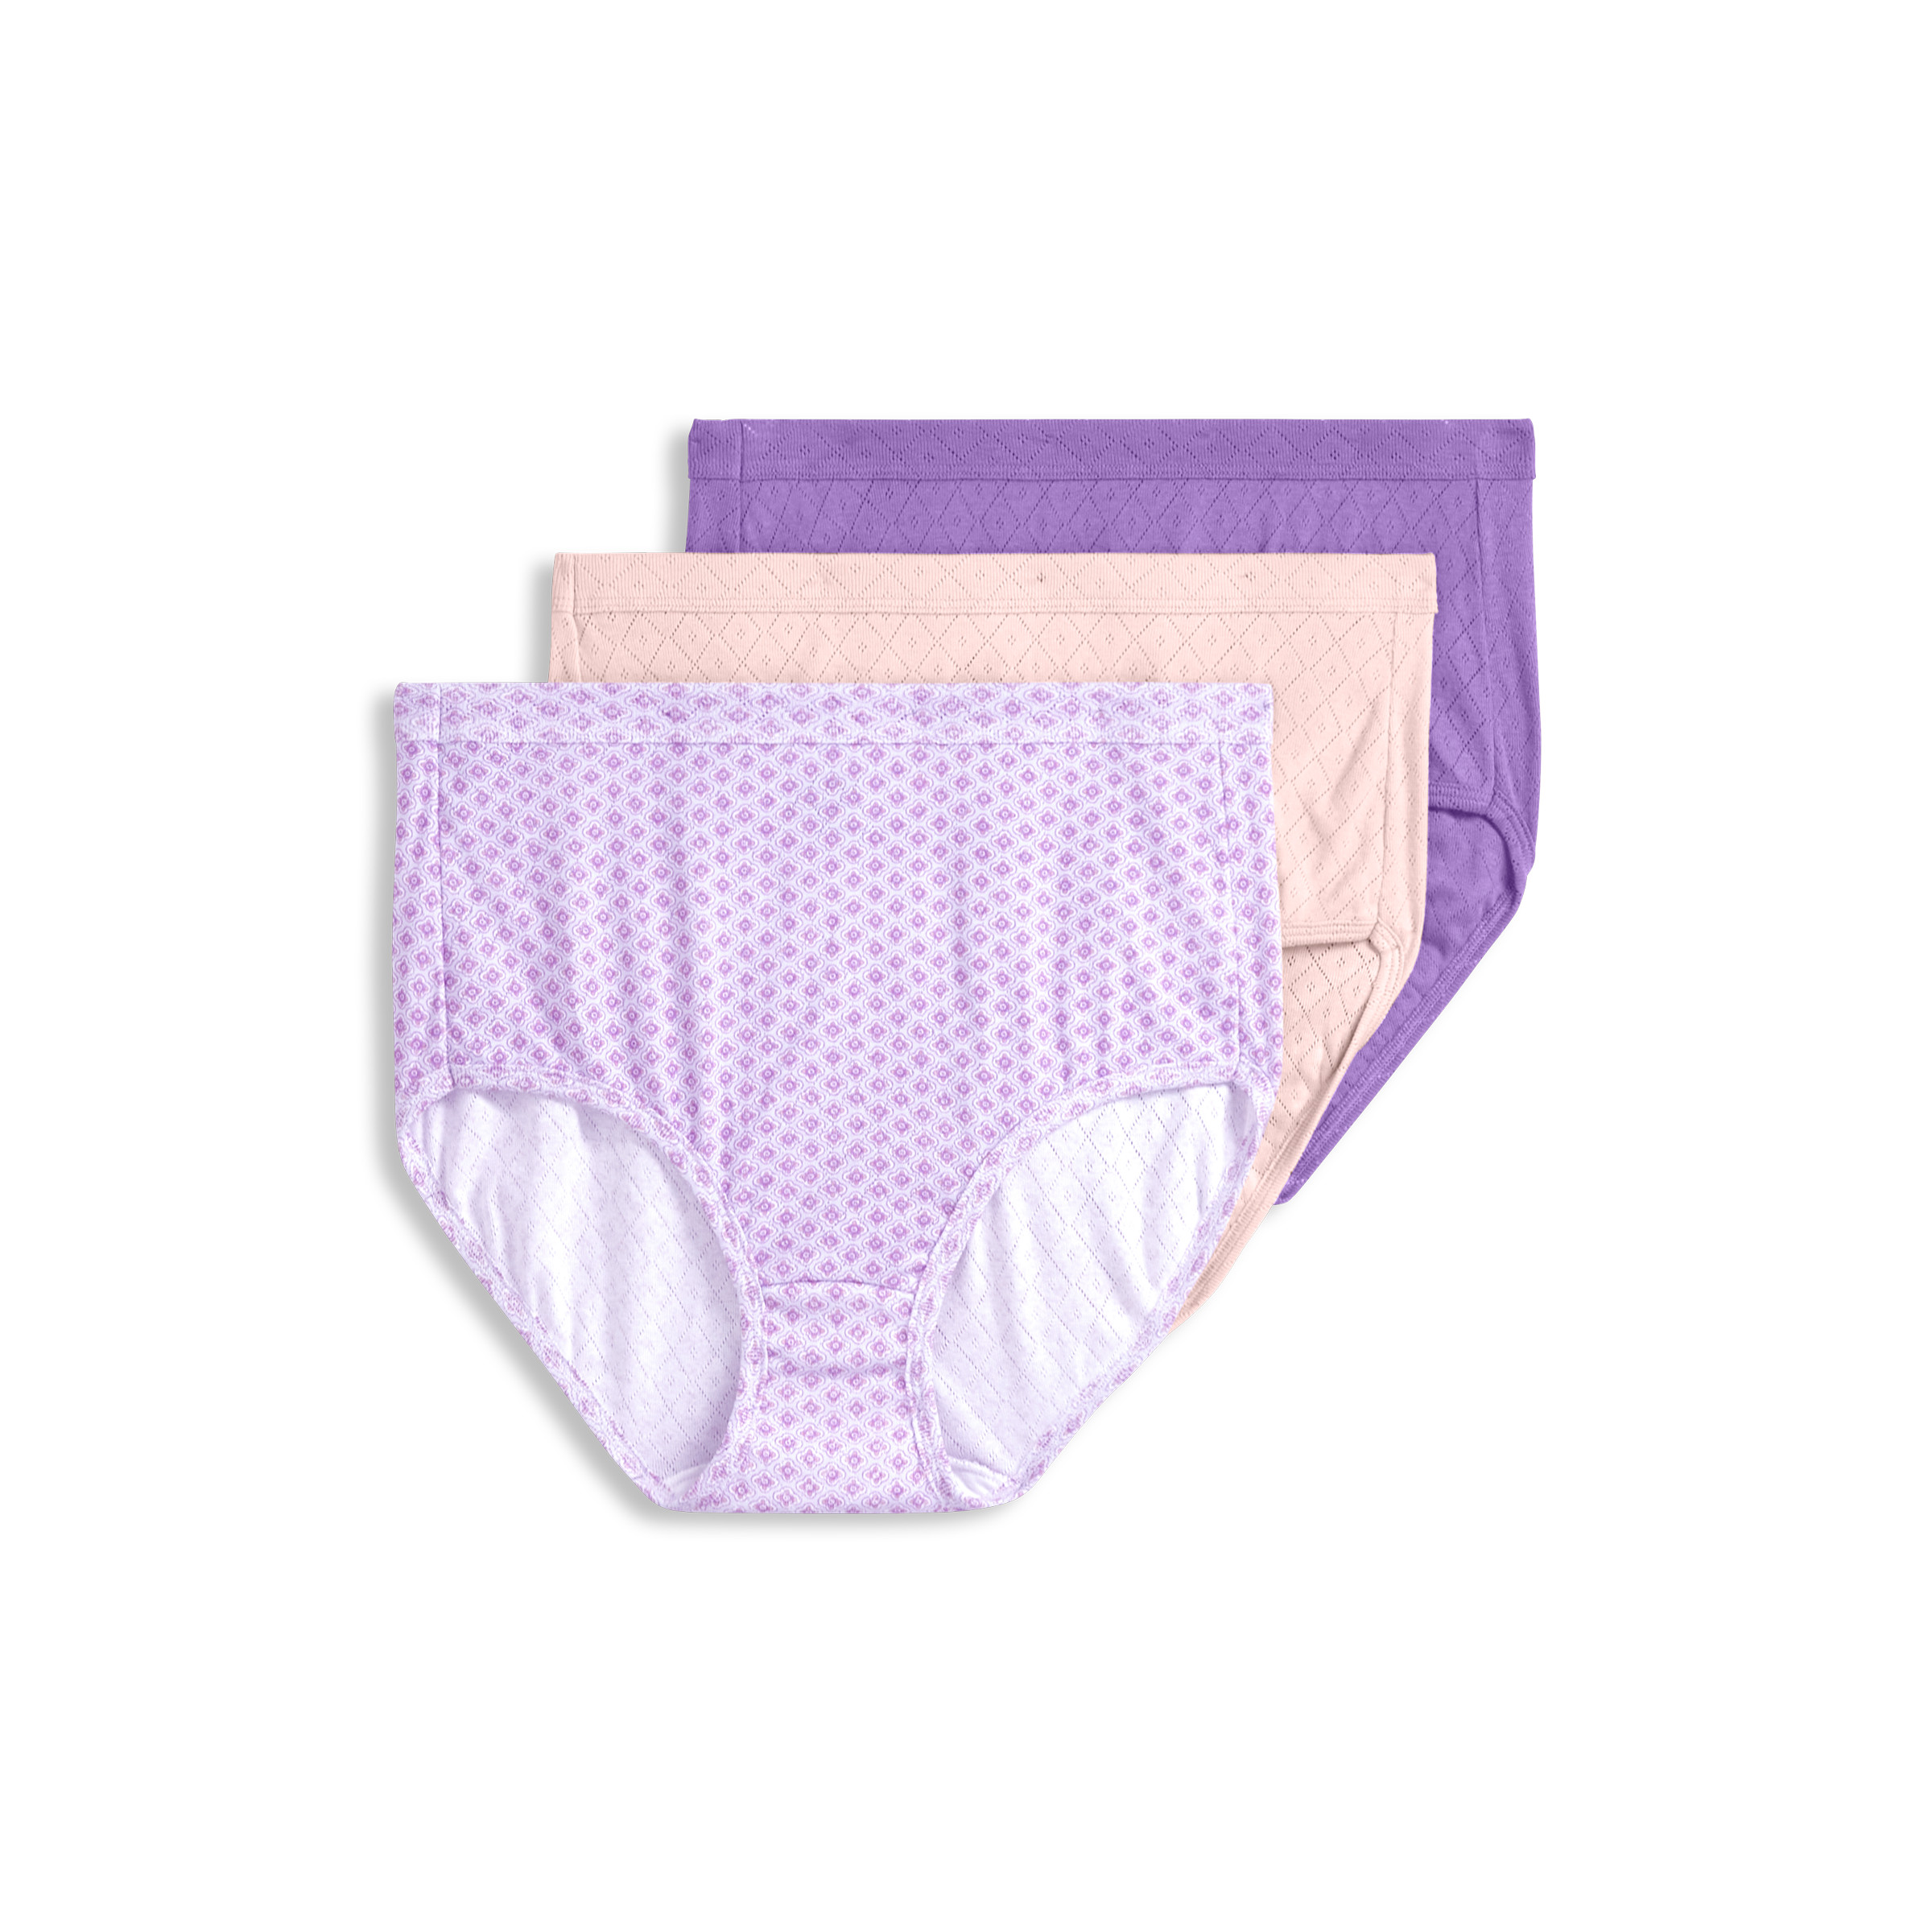 e-Tax  30.0% OFF on JOCKEY UNDERWEAR Women's High-Waisted Panties Pack 2  Pieces Breathable Soft Cotton and Perfectly Form-Fitting - Multicolor